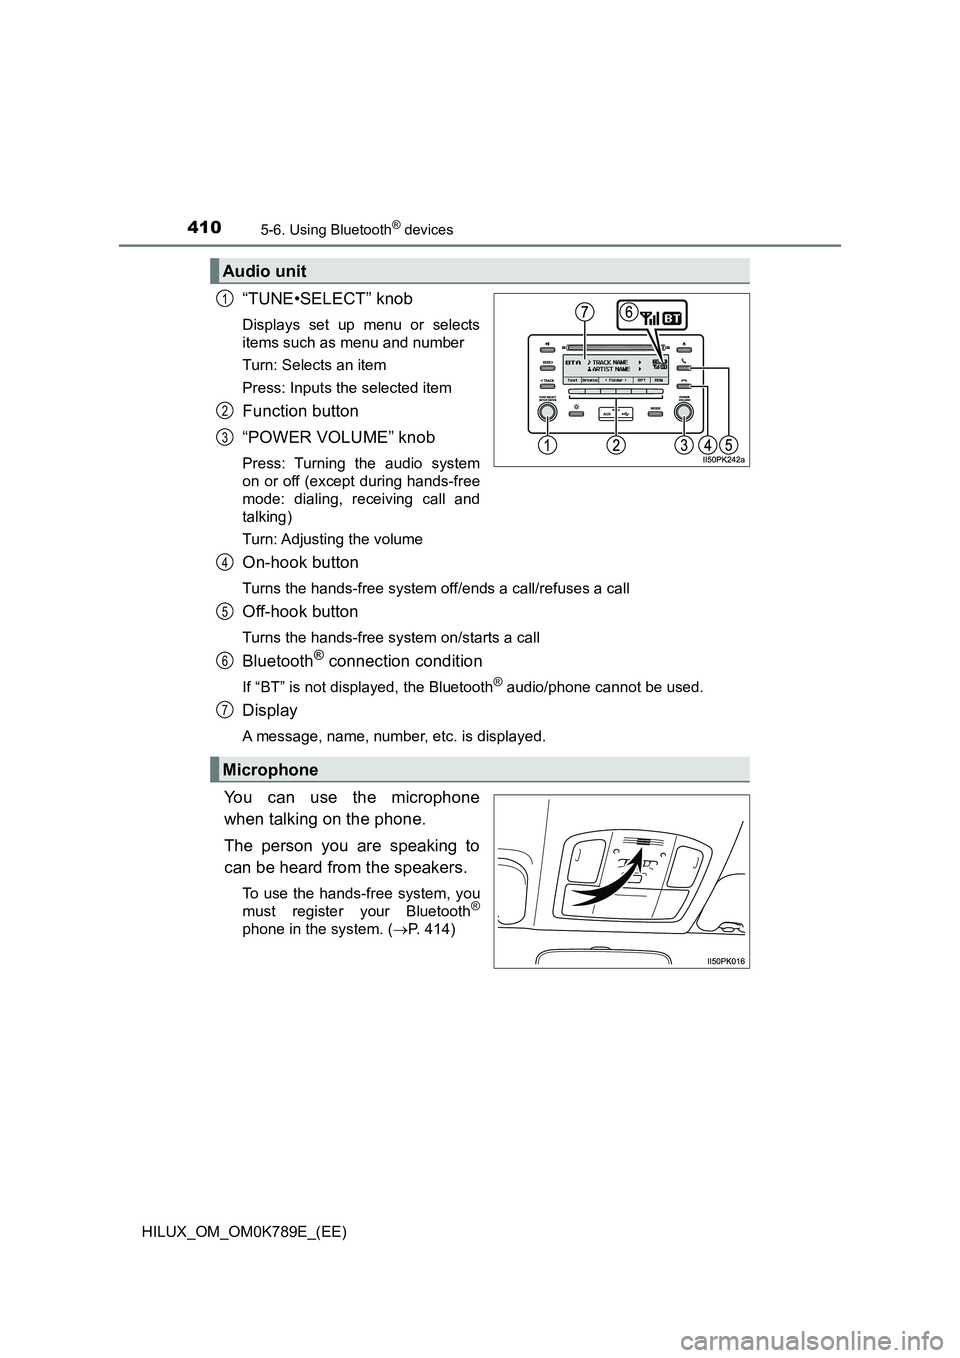 TOYOTA HILUX 2023  Owners Manual 4105-6. Using Bluetooth® devices
HILUX_OM_OM0K789E_(EE)
“TUNE•SELECT” knob
Displays set up menu or selects 
items such as menu and number 
Turn: Selects an item
Press: Inputs the selected item
